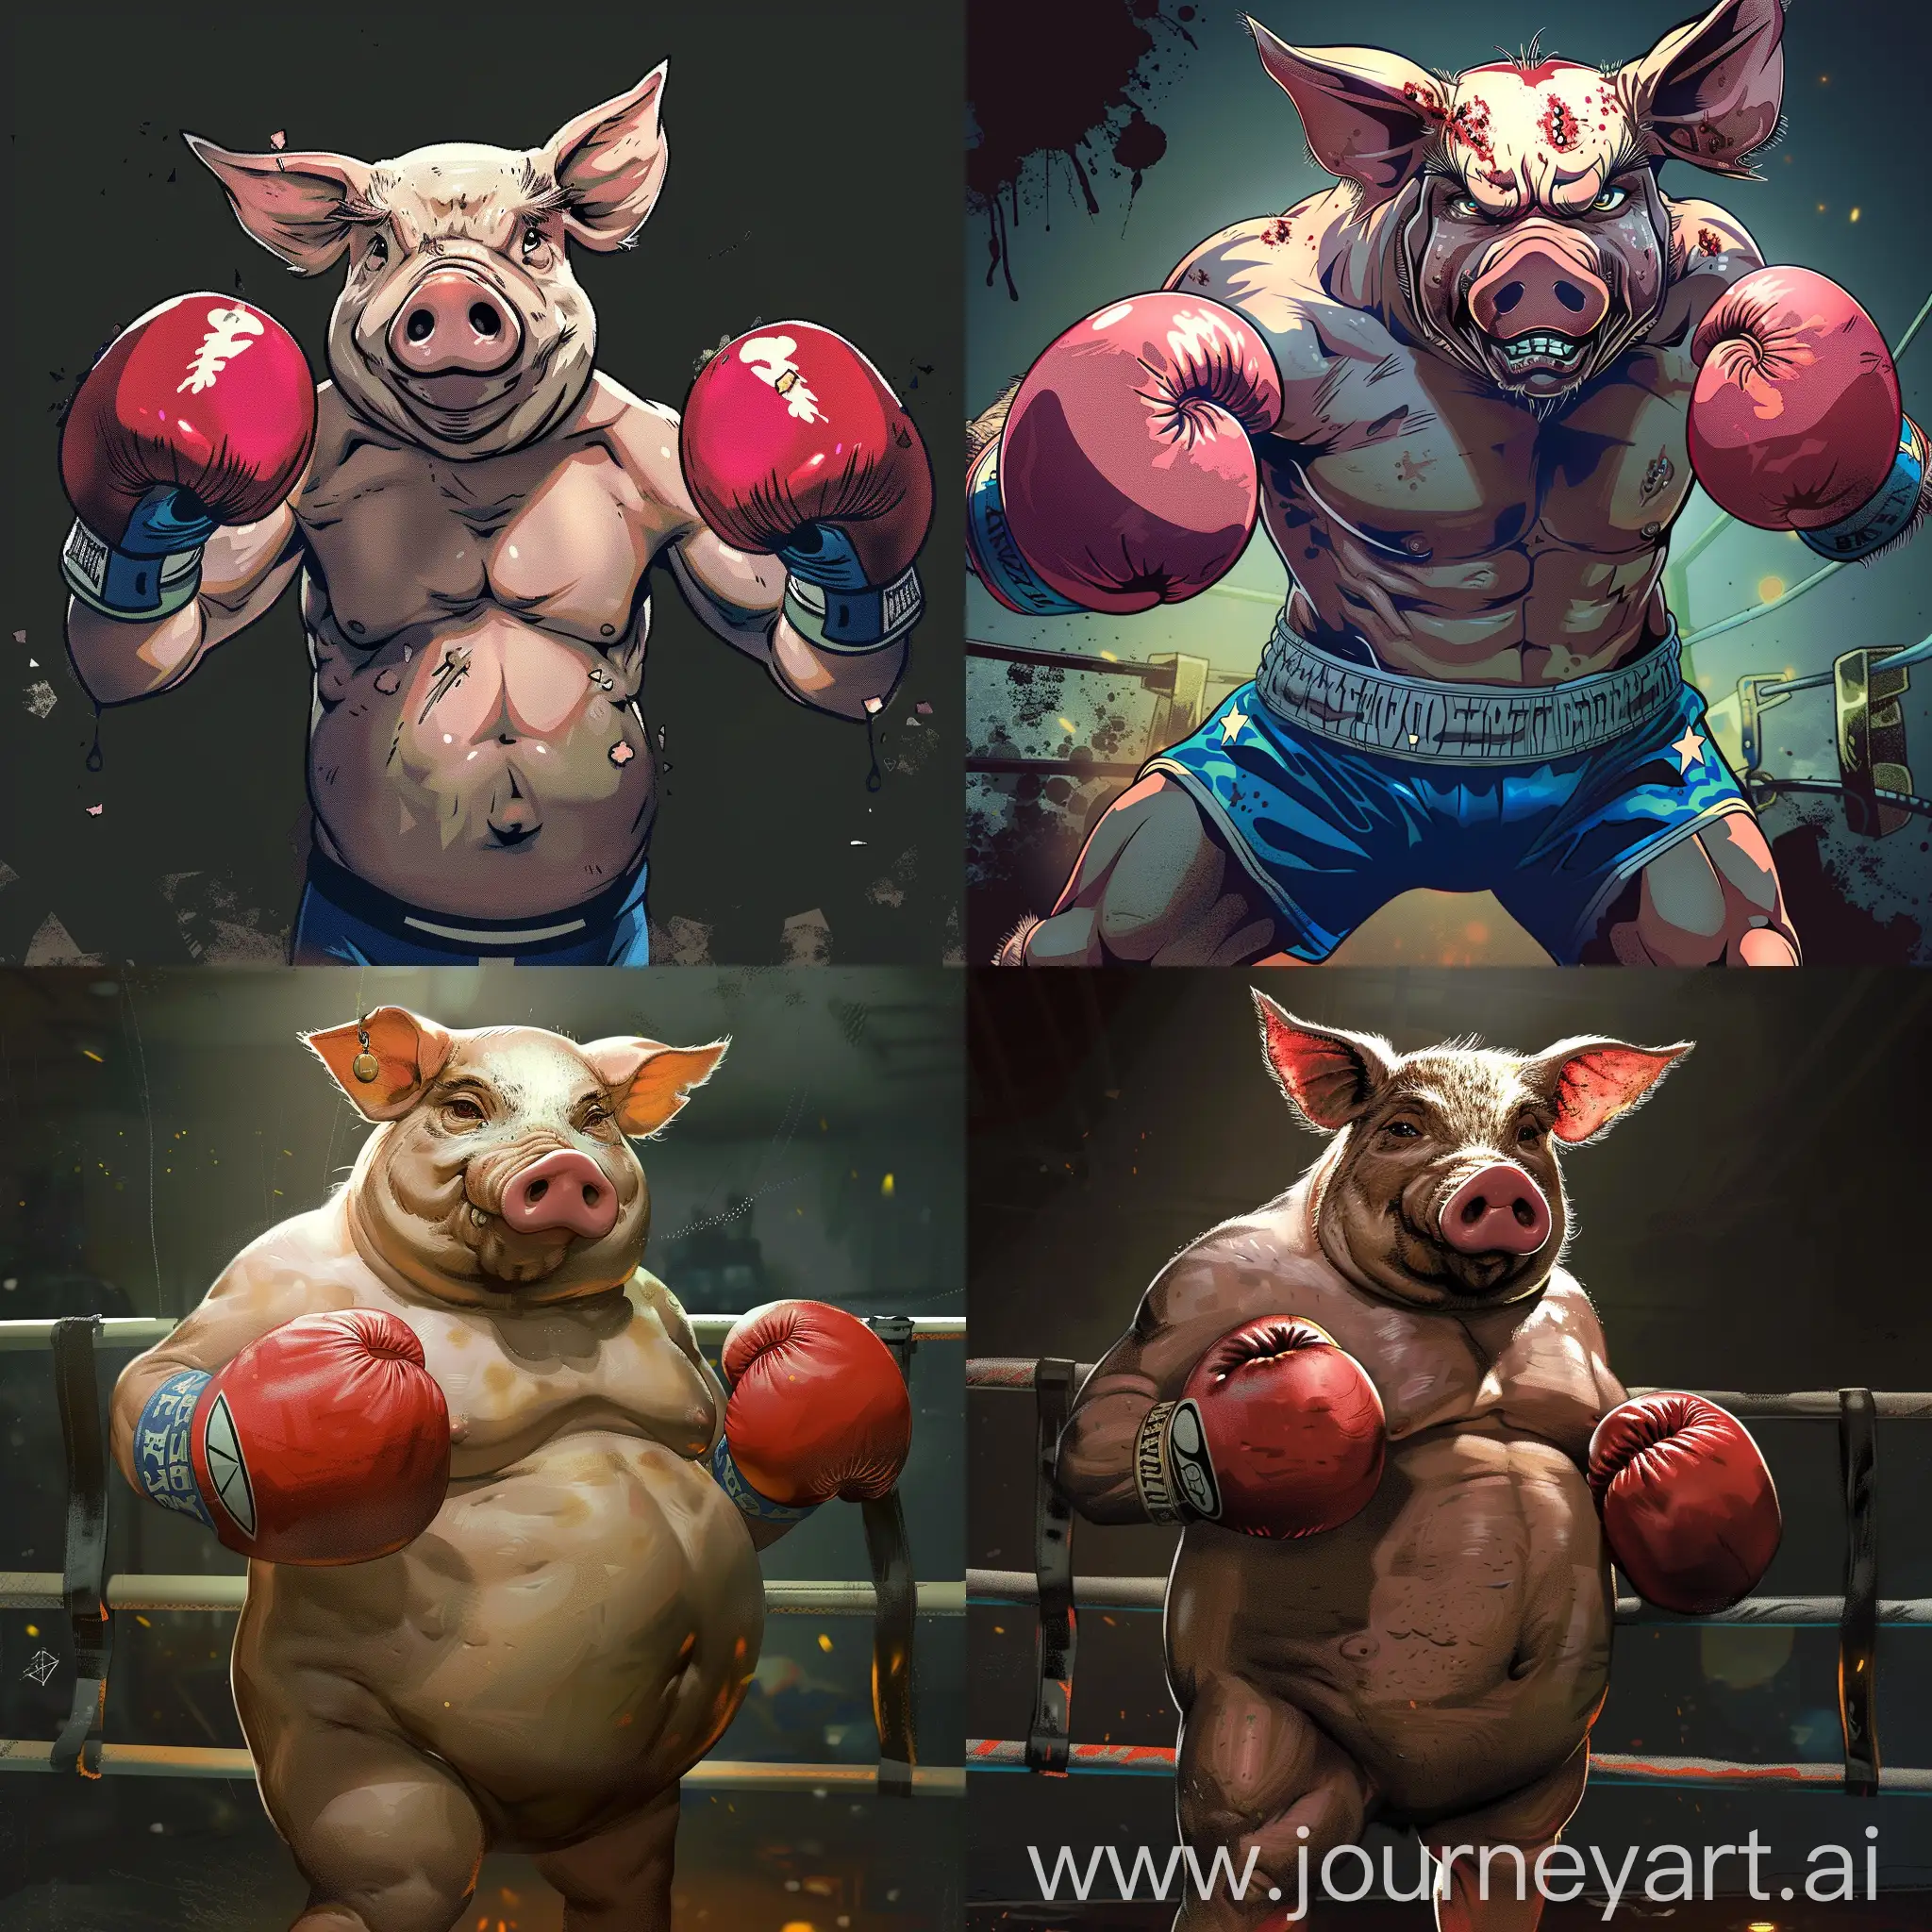 An anime style powerful and terrifying boxing hero pig.